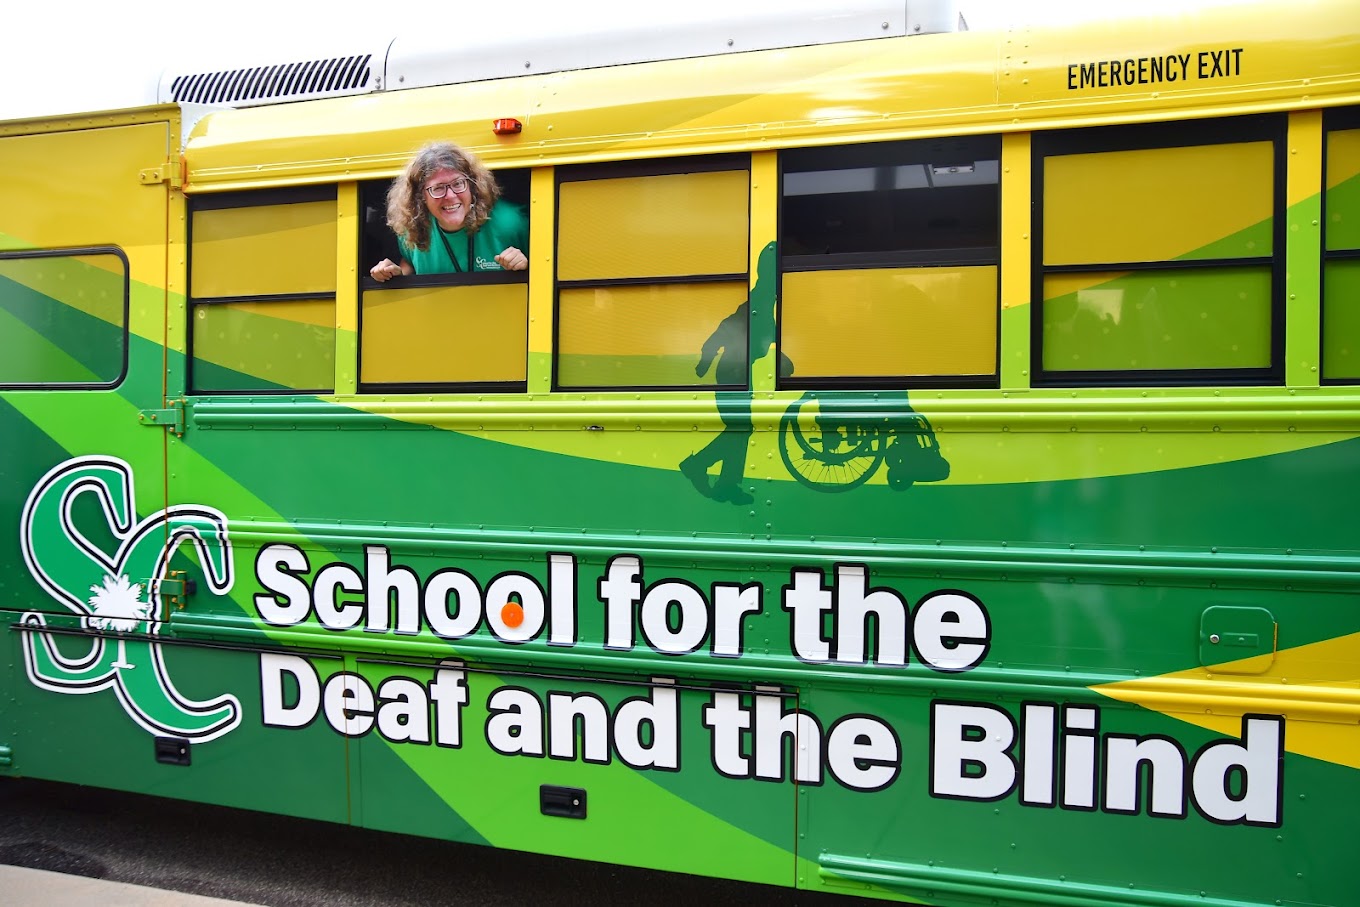 SC School for the Deaf and the Blind school bus